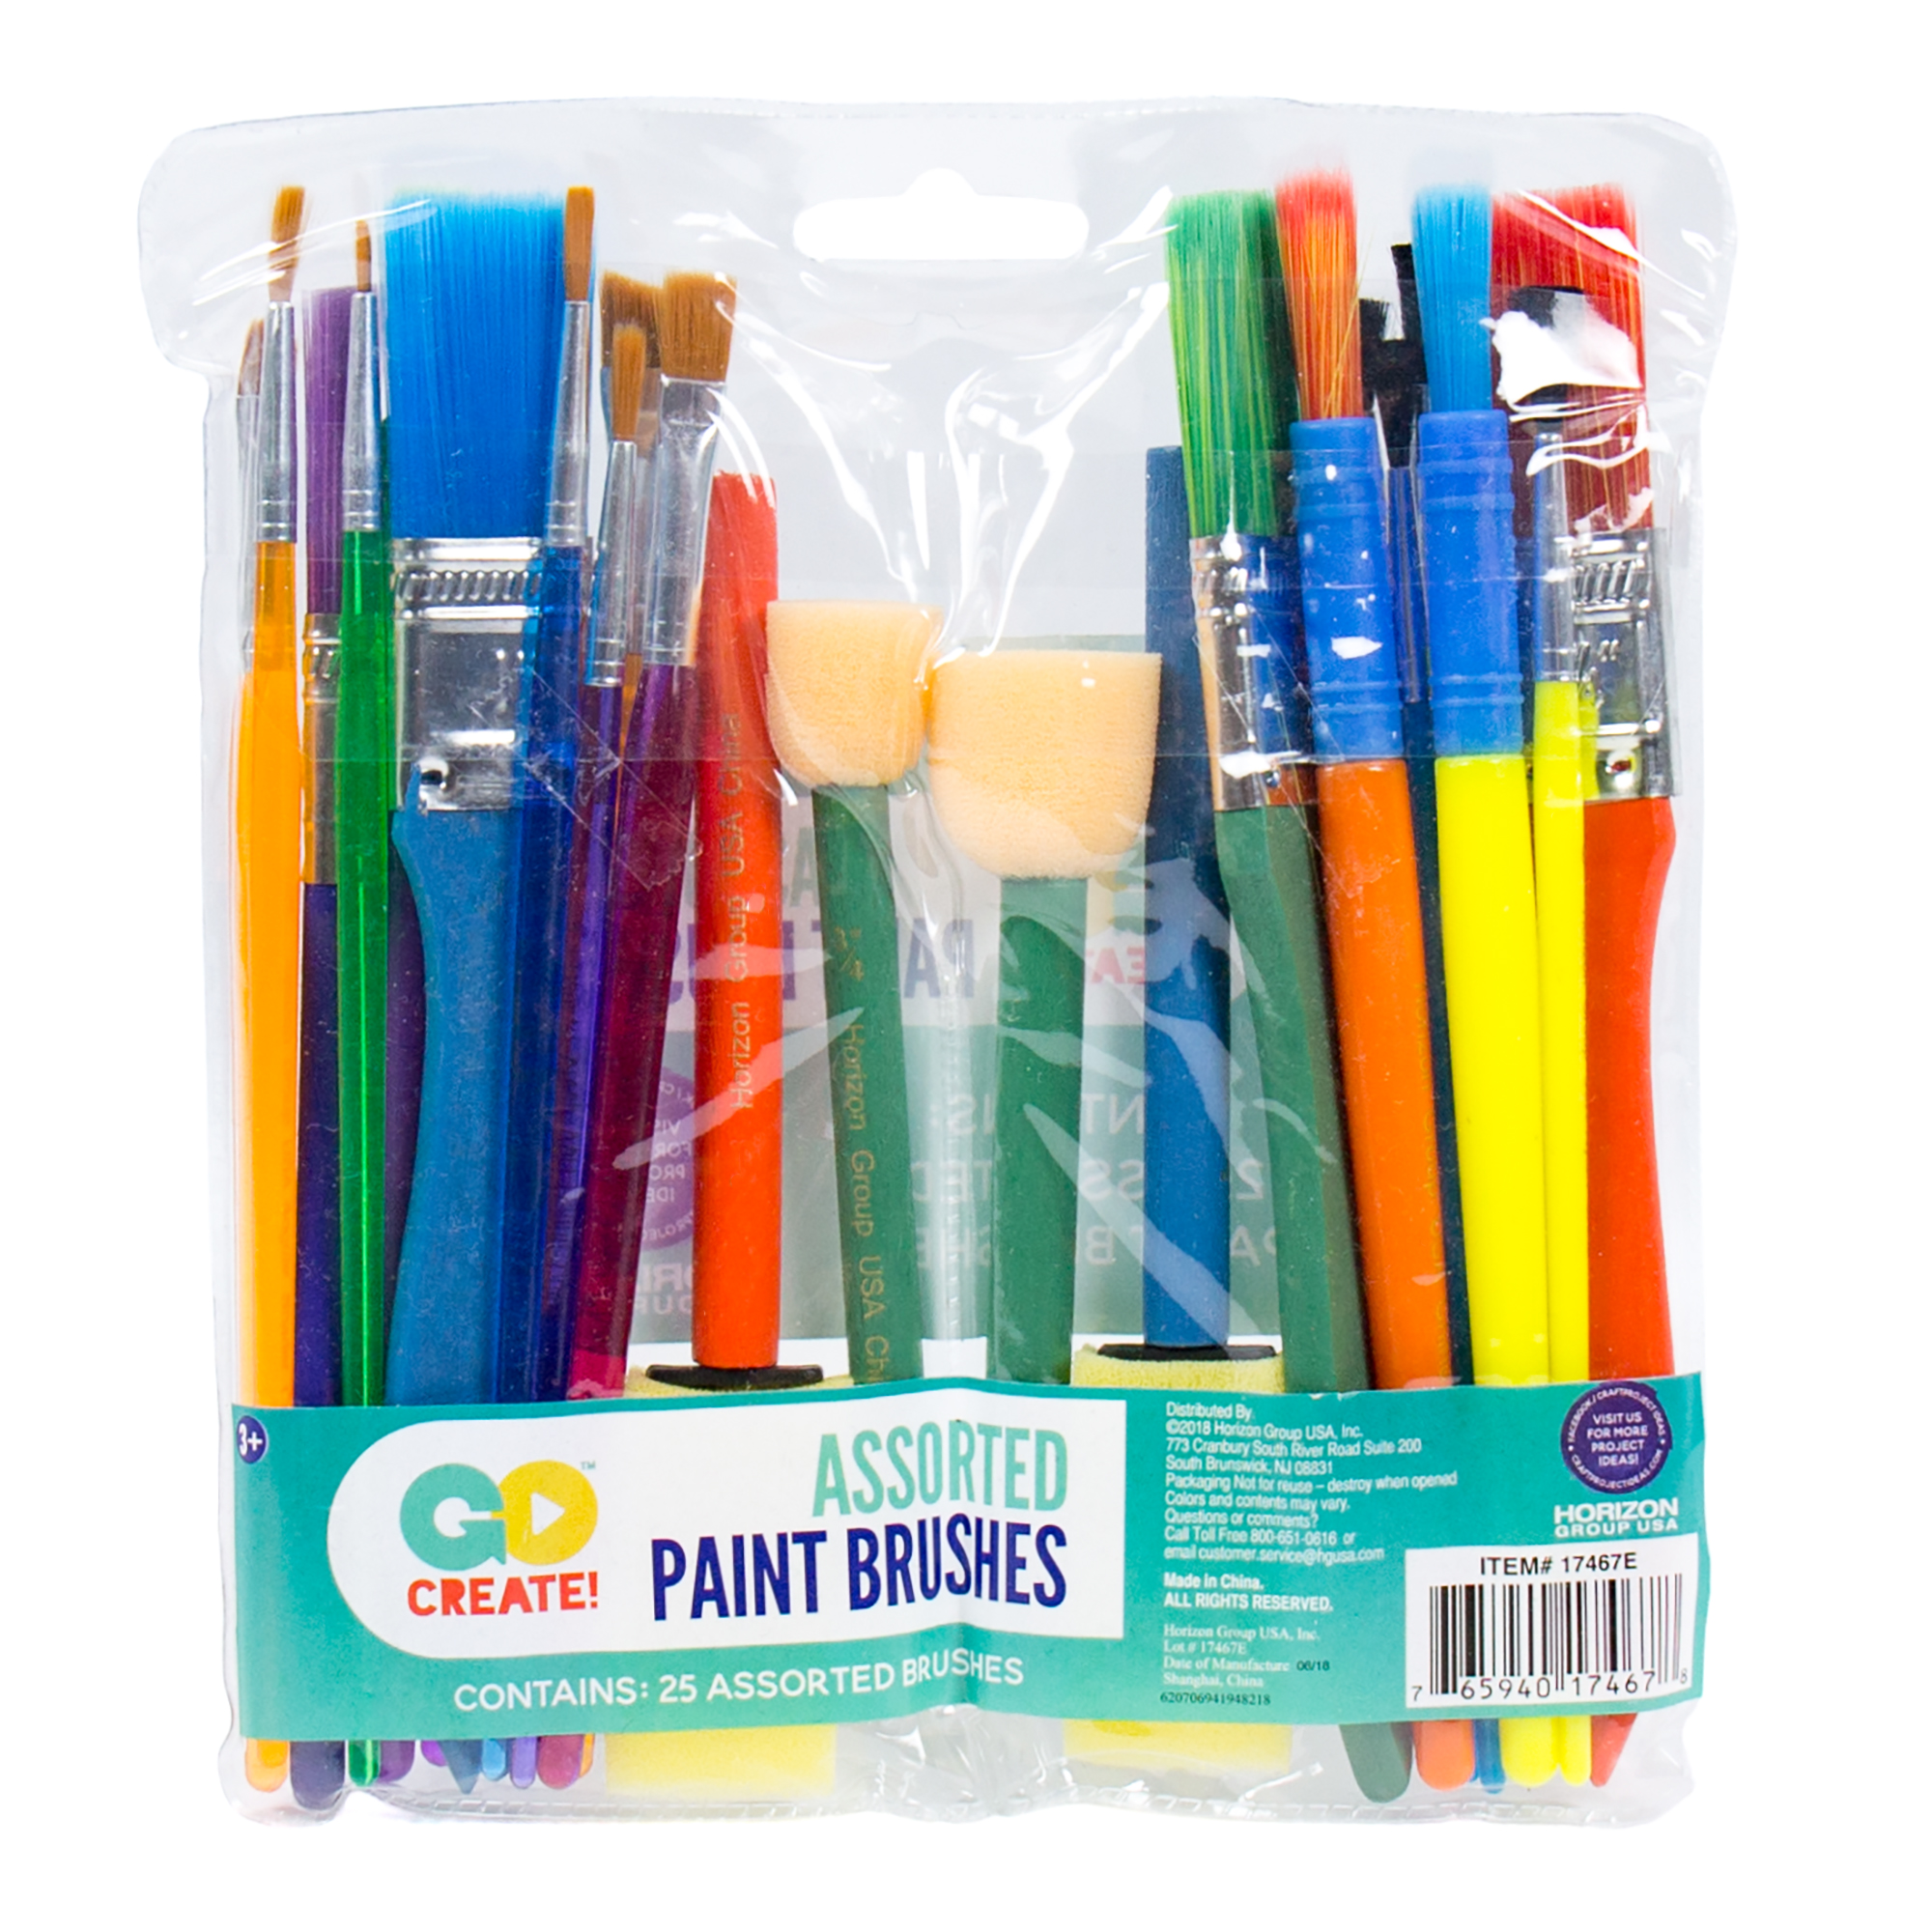 Go Create Assorted Paint Brushes, 25 ct. - image 5 of 5